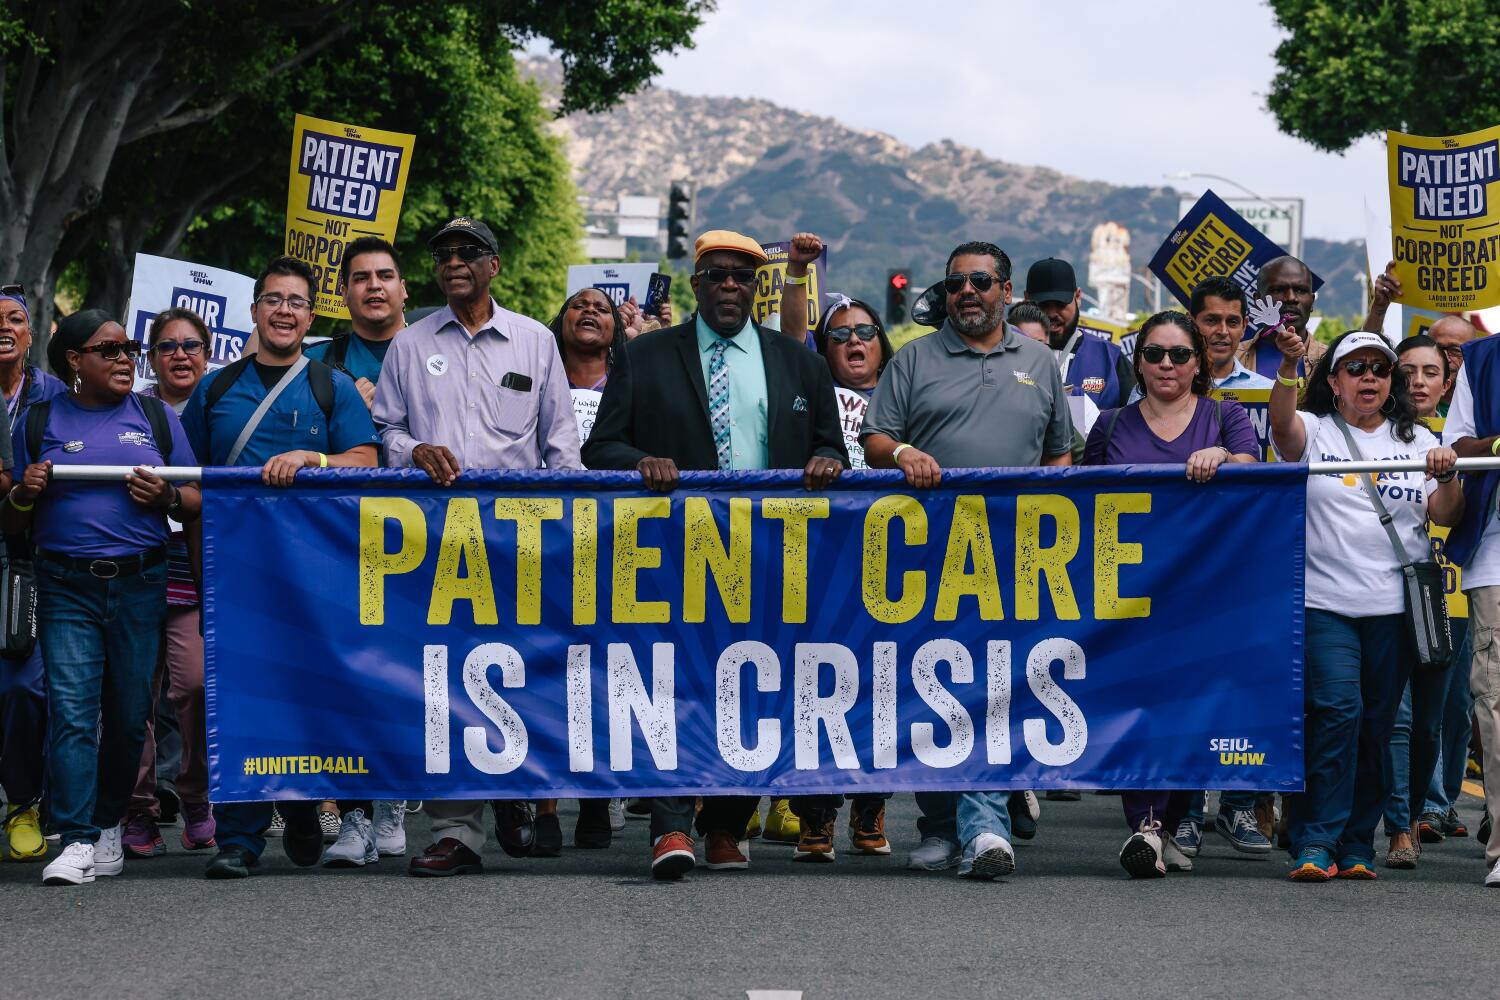 ?url=https%3A%2F%2Fcalifornia times brightspot.s3.amazonaws.com%2F0d%2Fa9%2Fc4d002a545a7baebfe54d9aae834%2F1343732 healthcare workers rally 123